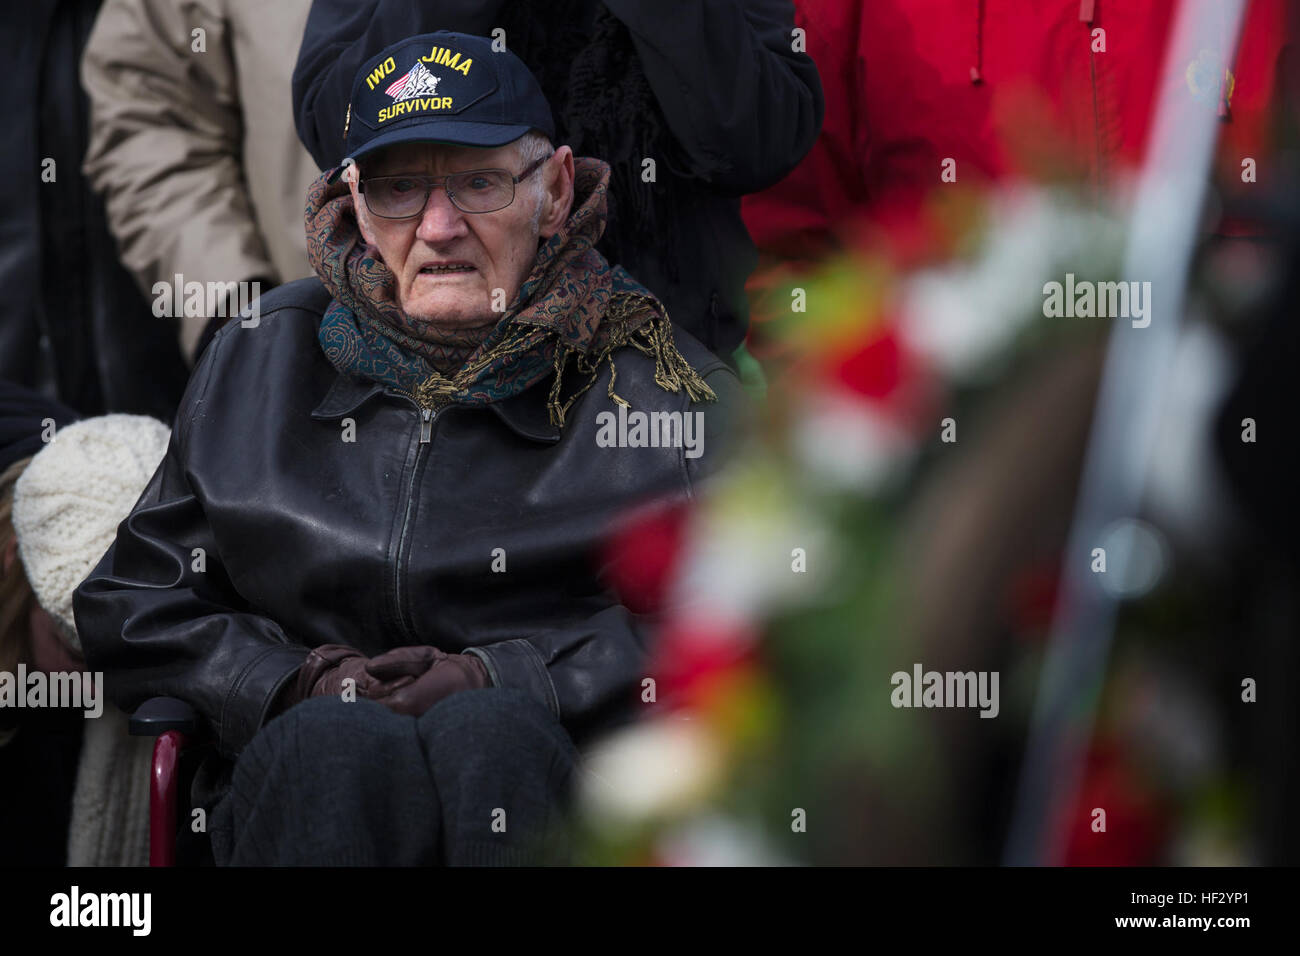 Lloyd Ford, a Marine veteran of World War II, observes a wreath laying ceremony at the Marine Corps War Memorial in Washington. The Ceremony commemorated the 70th anniversary of the battle for Iwo Jima. 'When we first landed, we got bombarded. This one guy was praying because he had been a lady's man. You start praying at a time like that.' (U.S. Marine Corps photo by Cpl. Clayton Filipowicz/Released) WWII Marine Veterans Remember Iwo Jima with Wreath Laying Ceremony 150219-M-LX723-003 Stock Photo